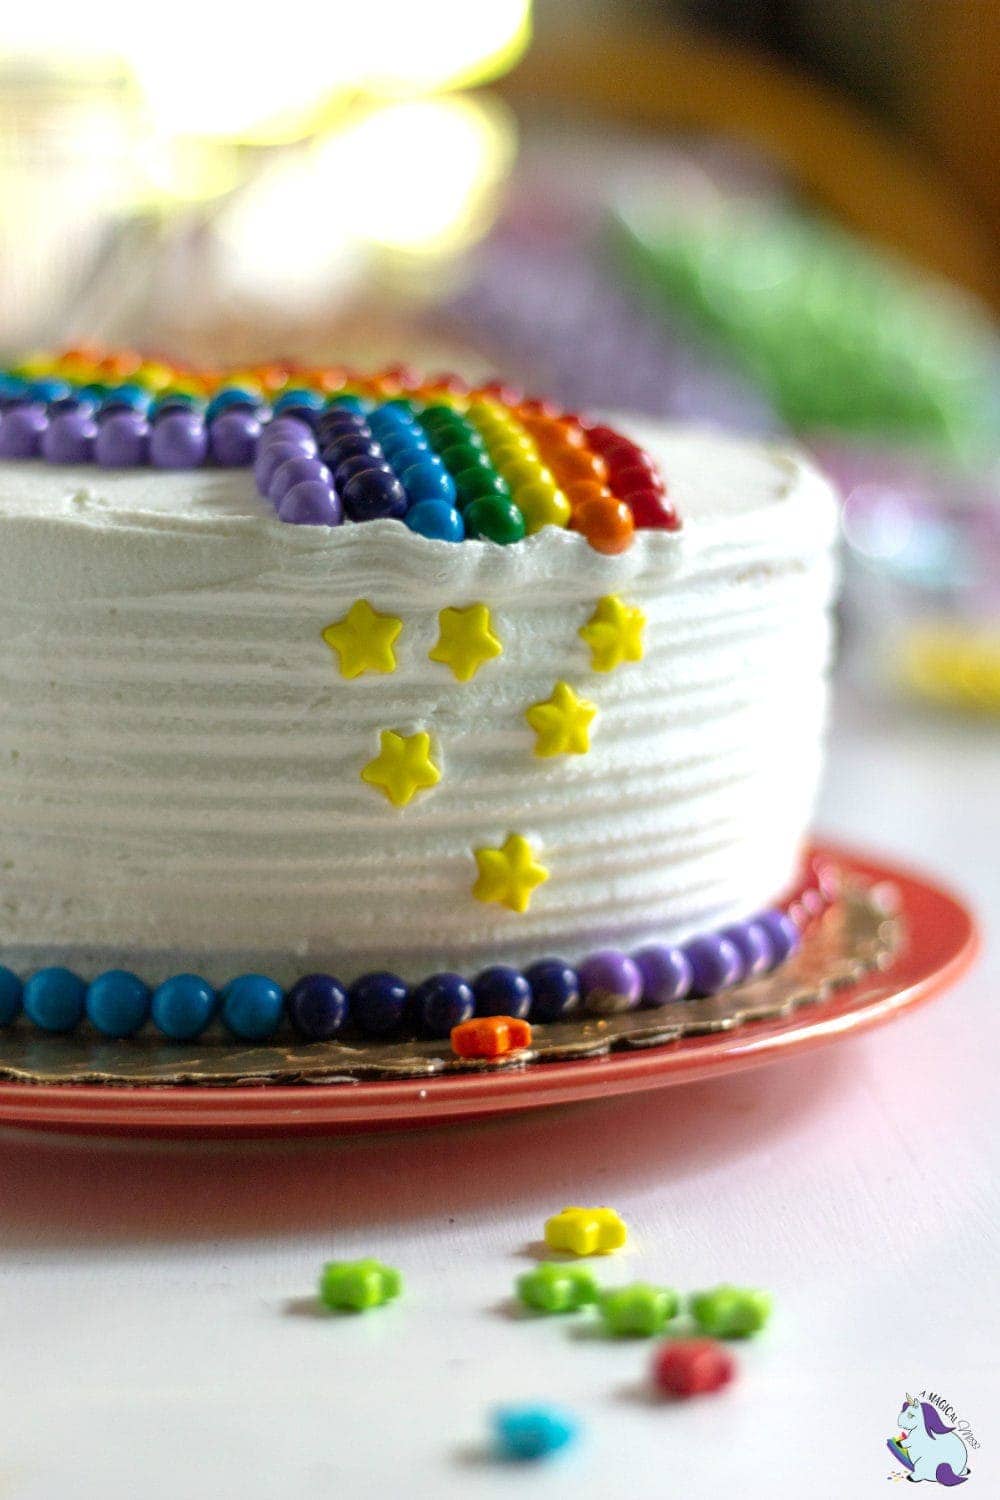 Easy Cake Decorating Hack - Make a Plain Cake look Magical in Minutes